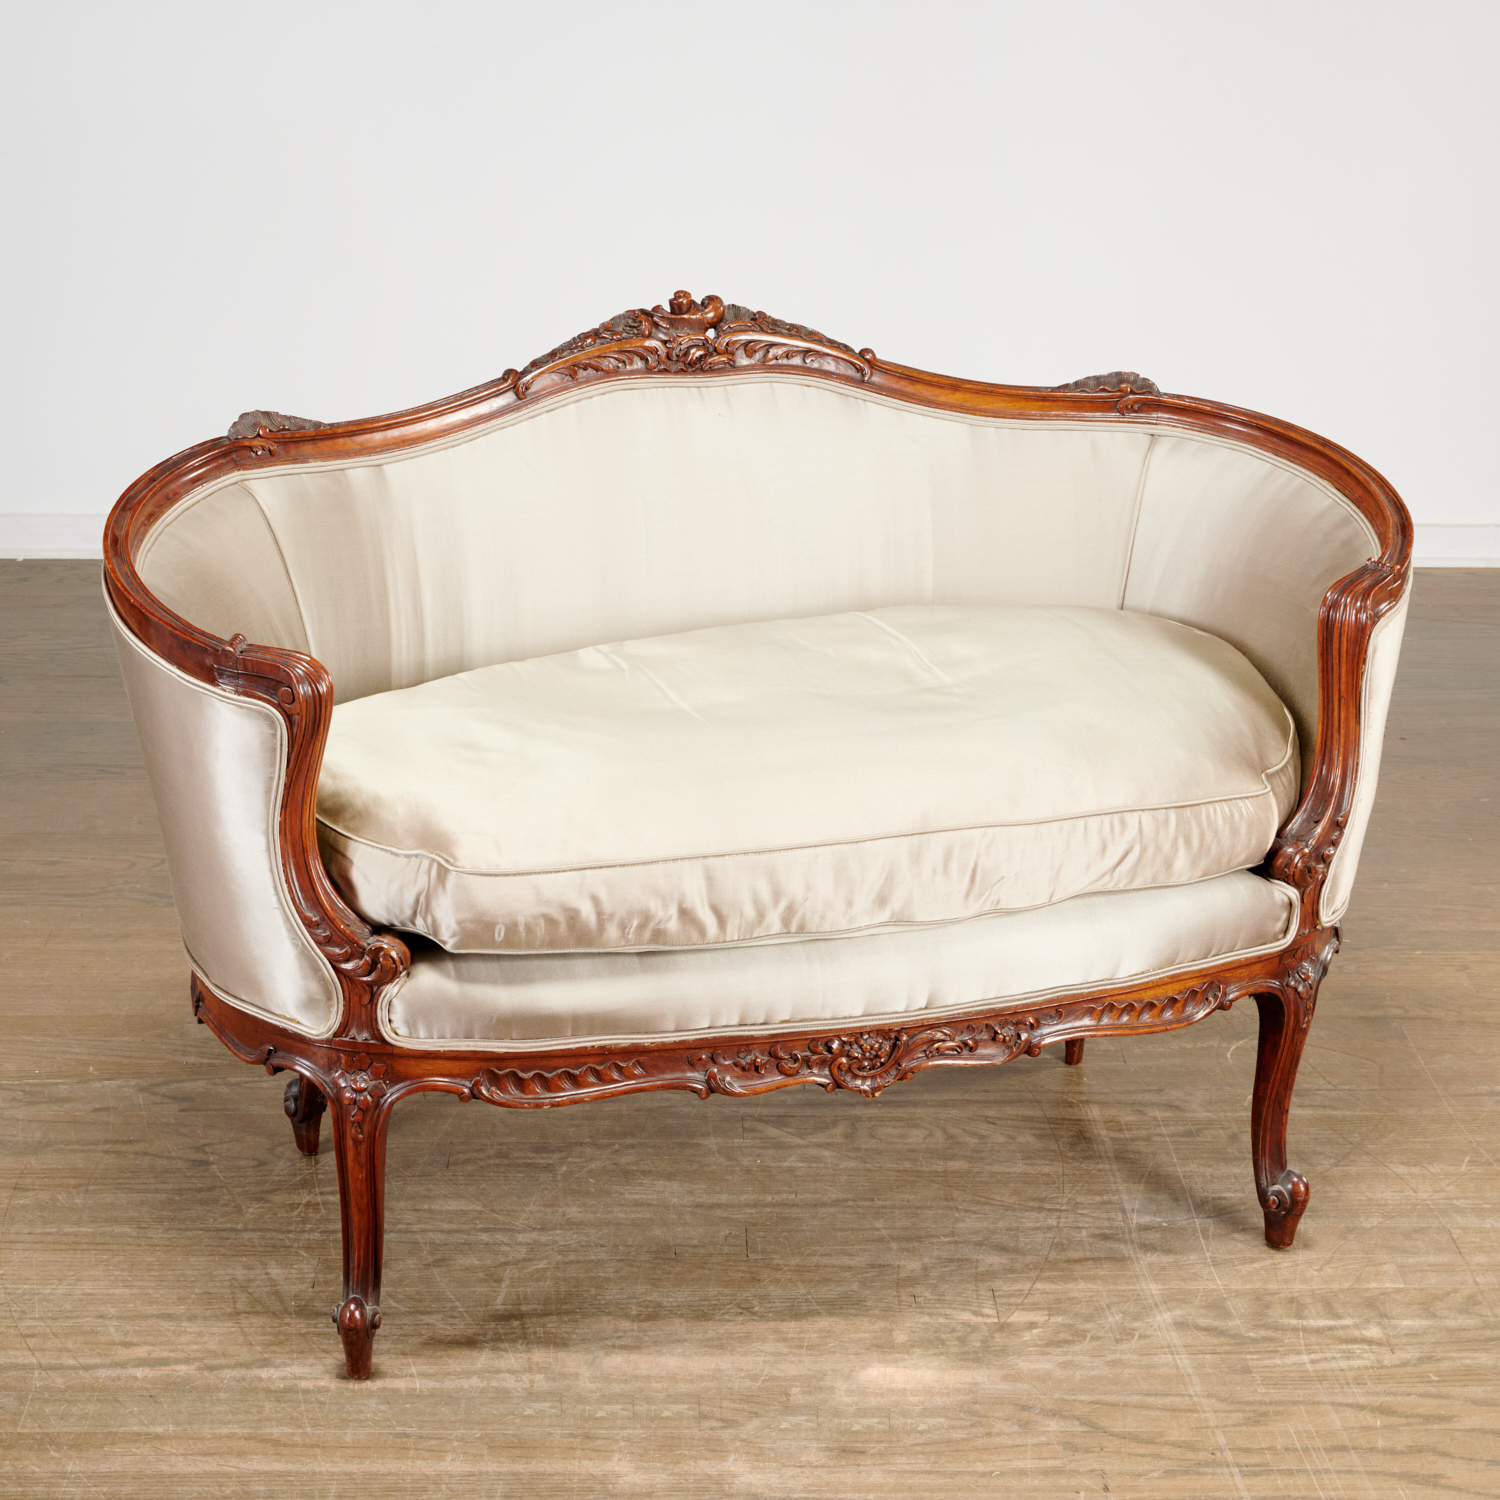 LOUIS XV STYLE SILK UPHOLSTERED